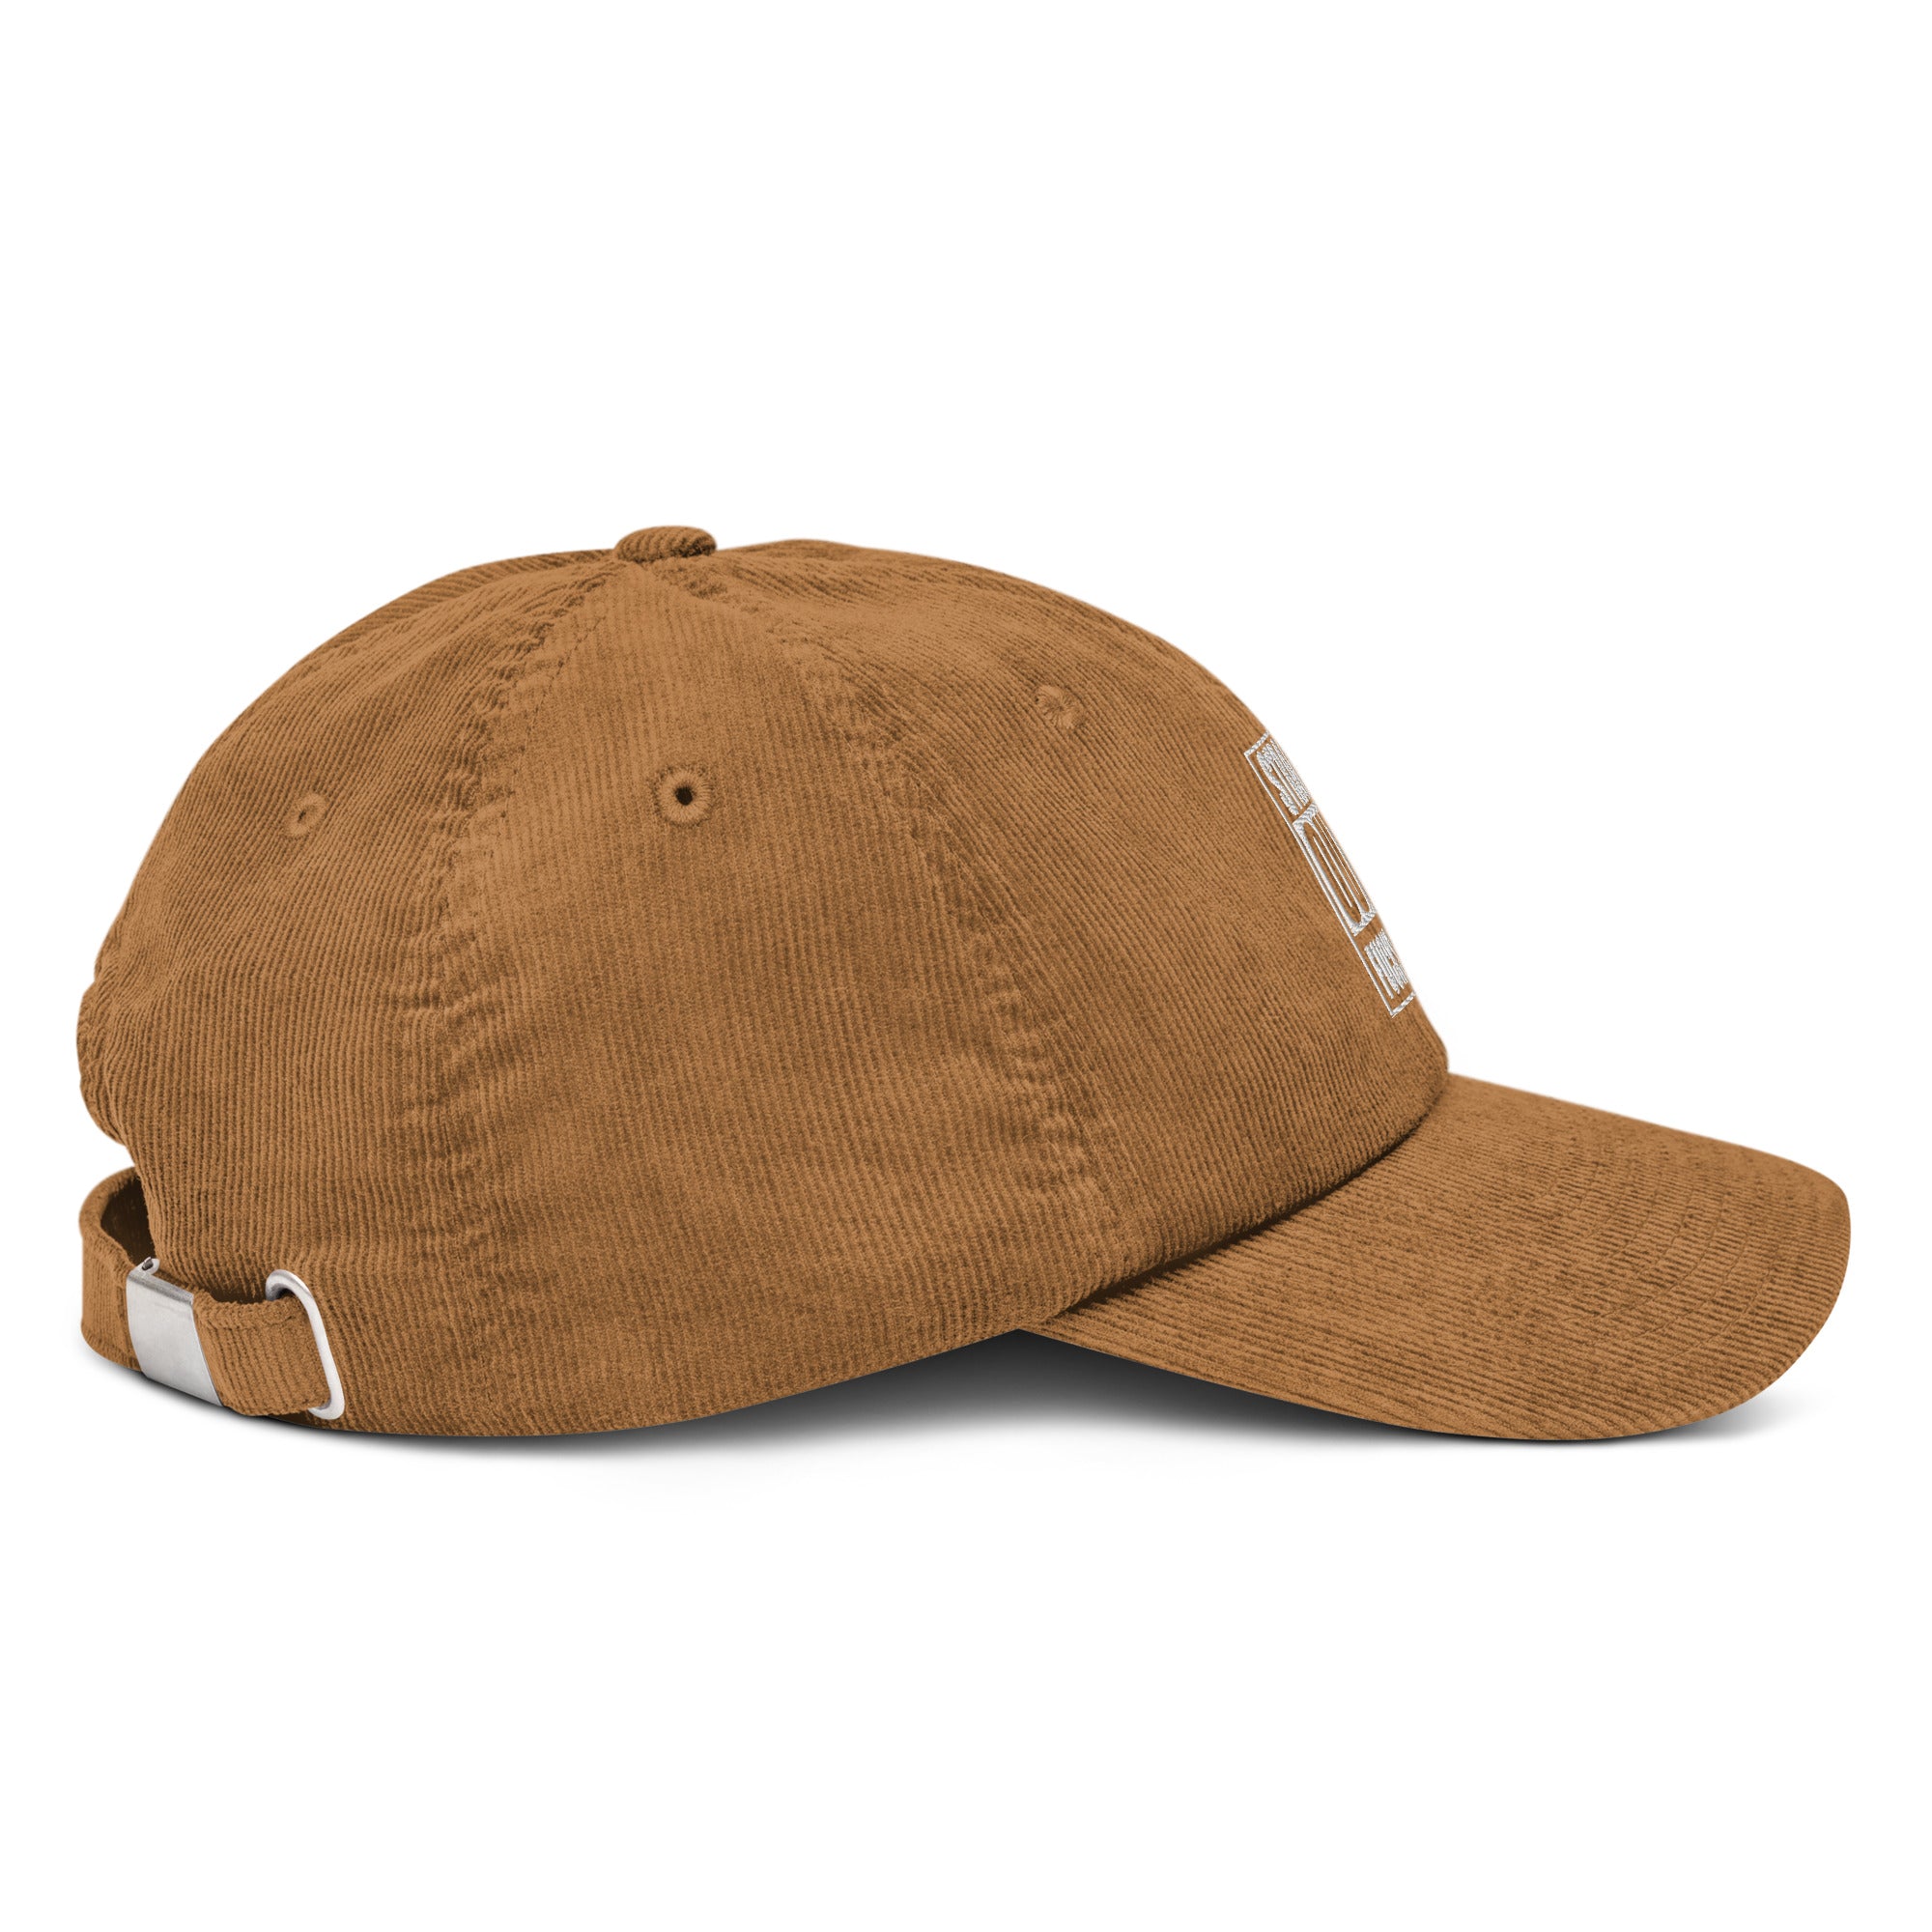 Straight Outta F To Give Corduroy Hat - Ty1010222